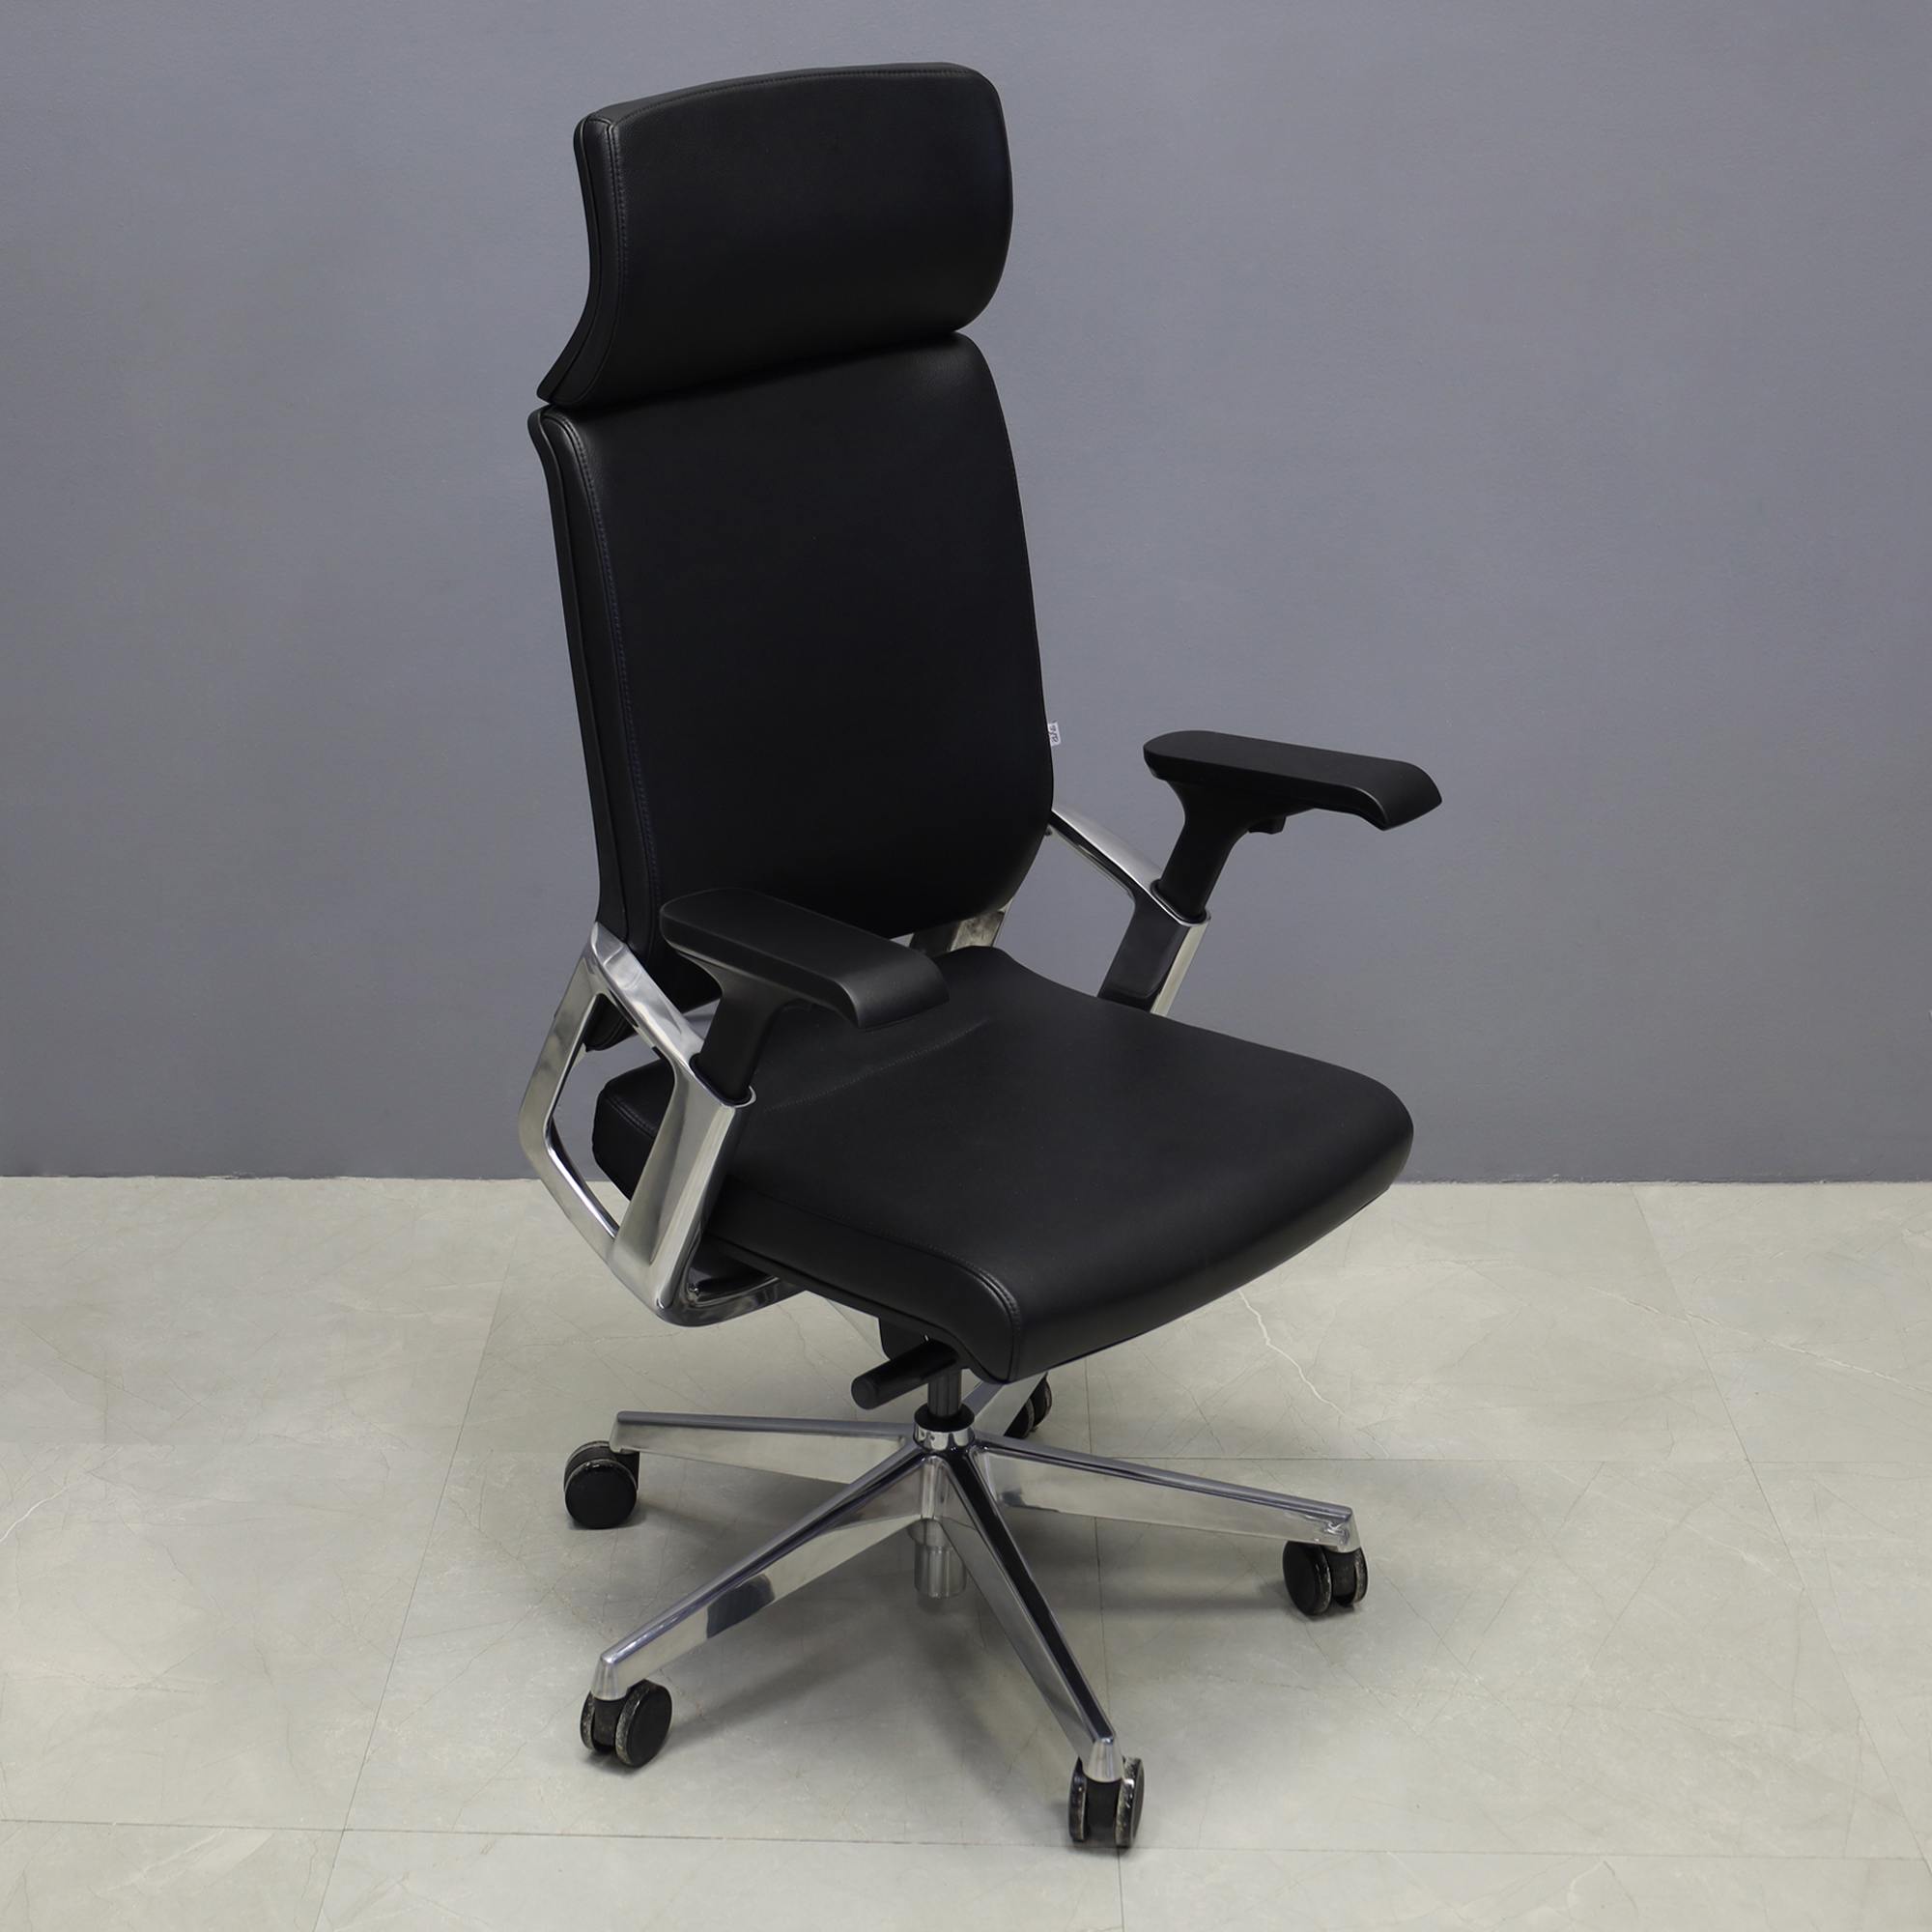 Visanti Executive Chair in top black grain leather, shown here.